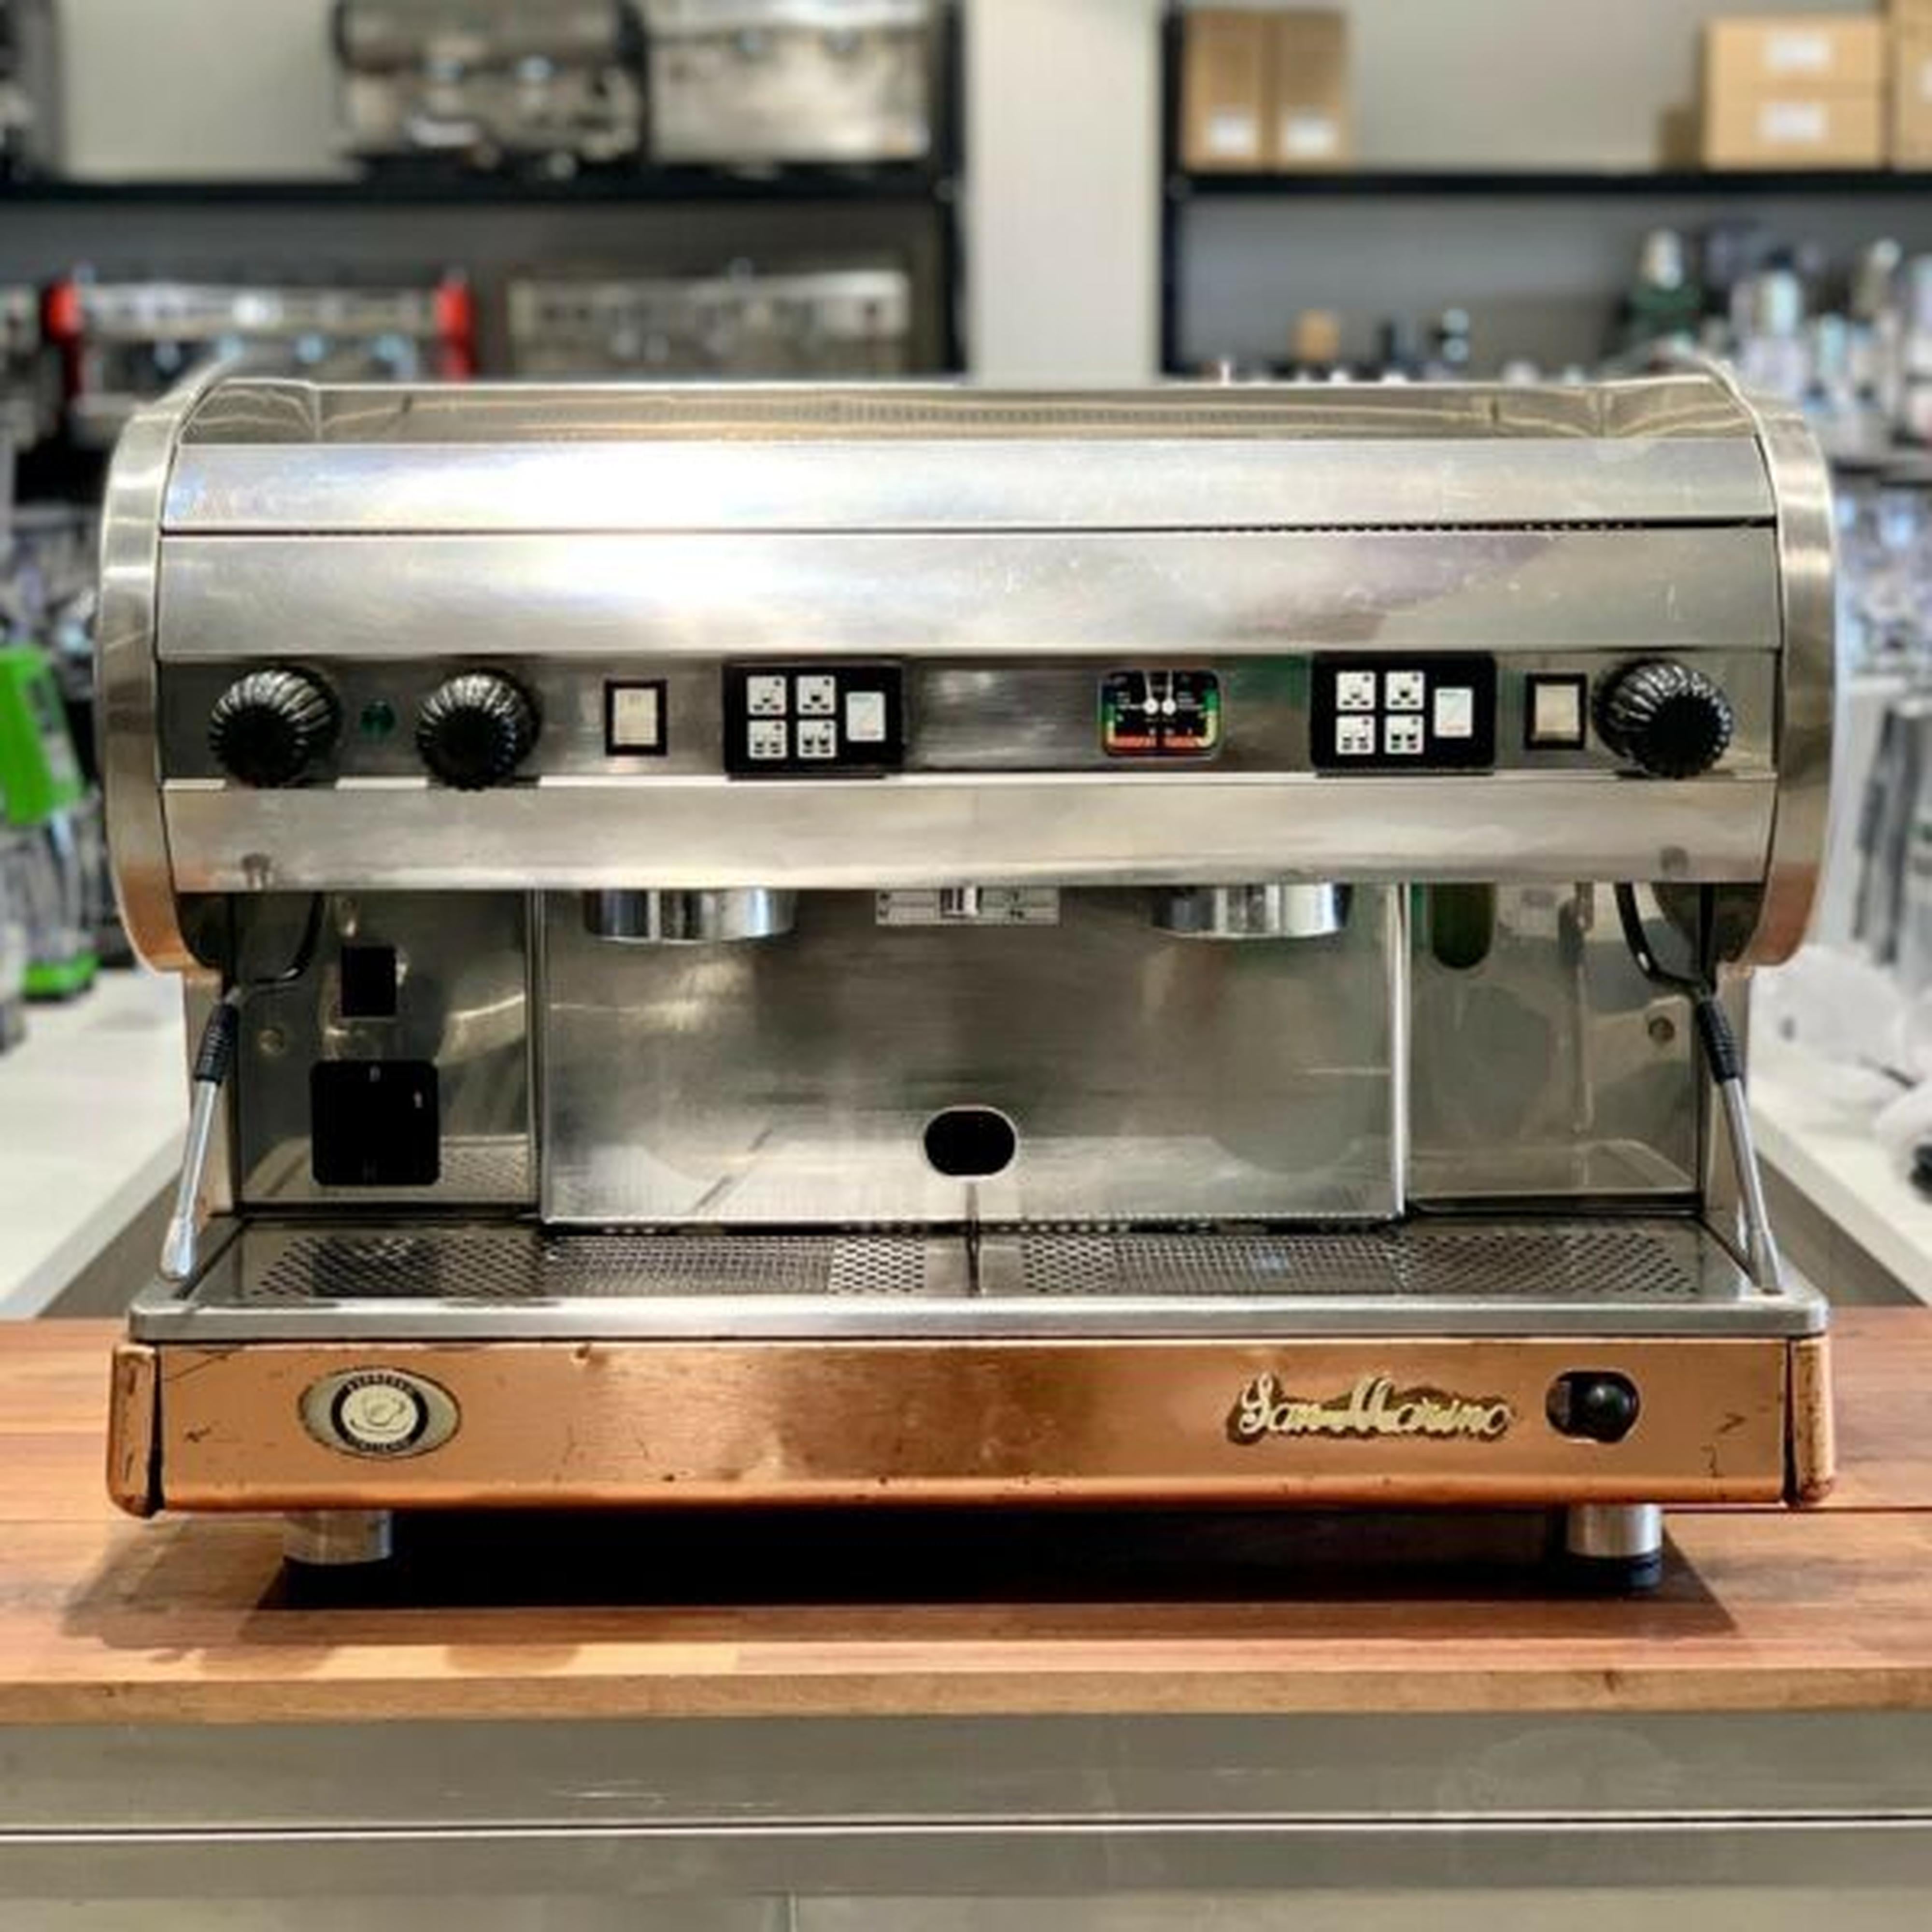 Used Fully Serviced 2 Group Sanmarino Lisa Commercial Coffee Machine